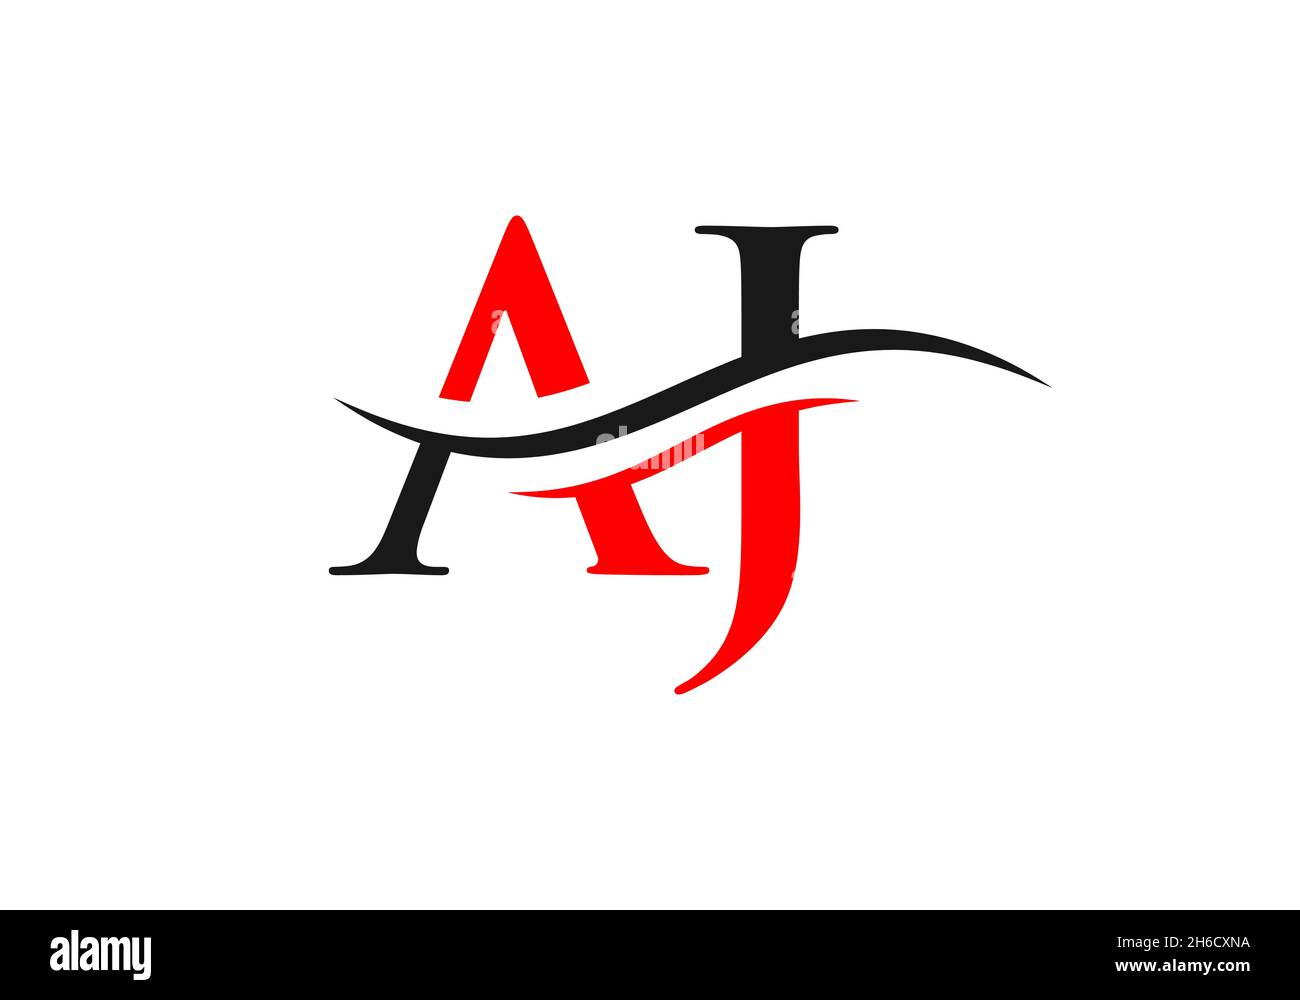 Water Wave AJ Logo Vector. Swoosh Letter AJ Logo Design for business and company identity. Stock Vector